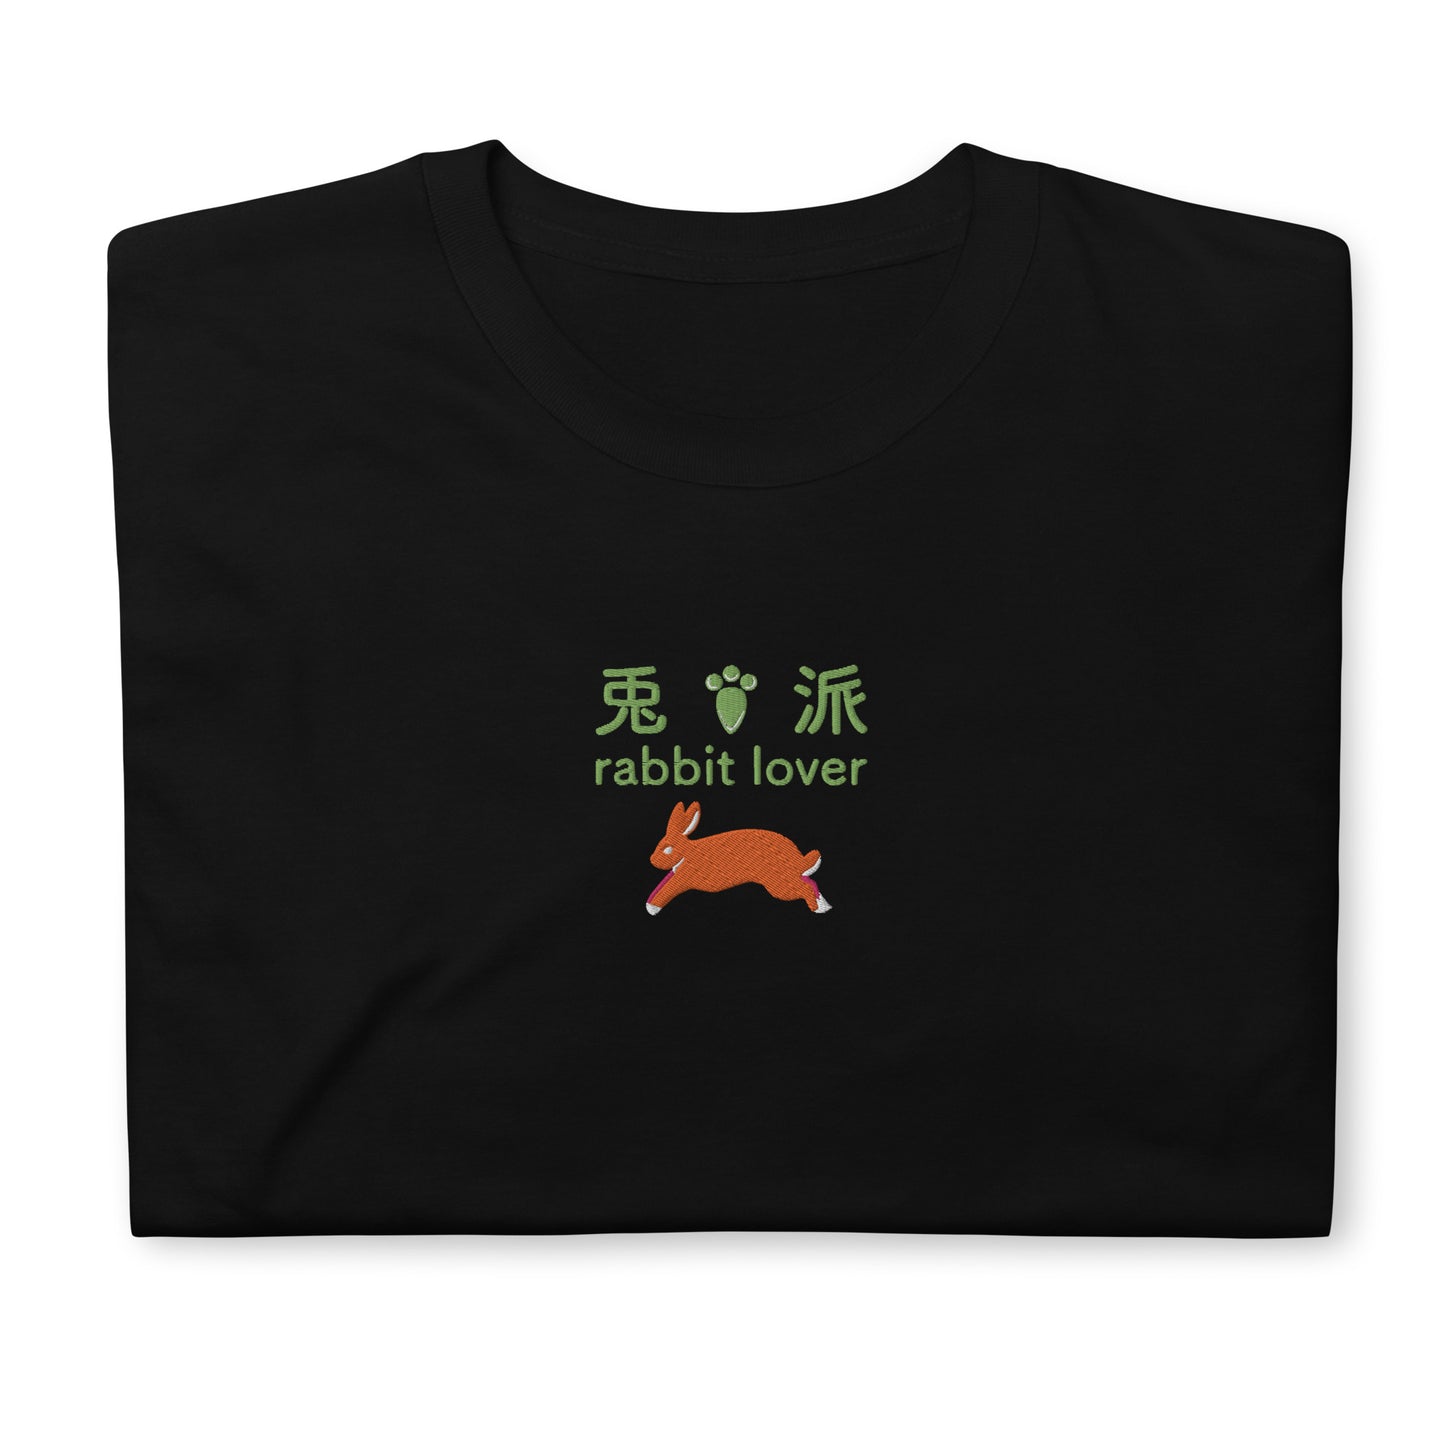 Black High Quality Tee - Front Design with an Brown, Green Embroidery "Rabbit Lover" in Japanese,Chinese and English, and Rabbit Embroidery